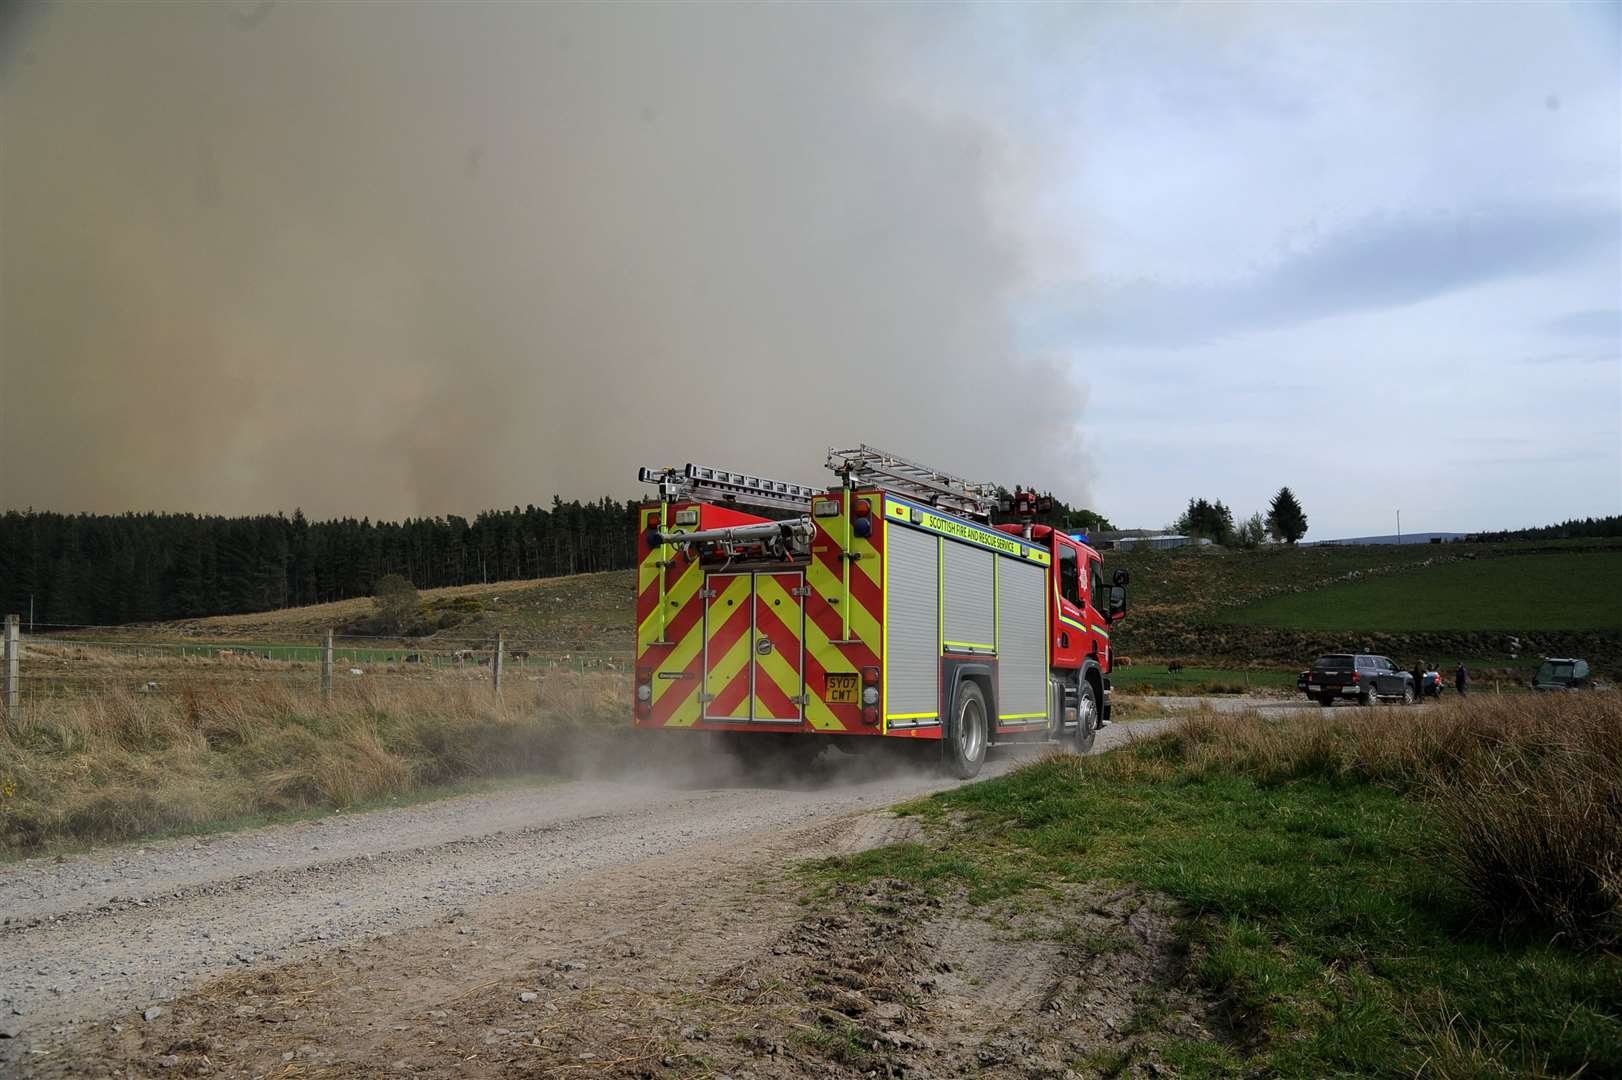 The Fire Which Started At Pauls Hill Wind Farm Reaches Dumphail South Of Forres. A Fire Tender Speeds Towards The Smoke.Picture: Eric Cormack. Image No.043809.